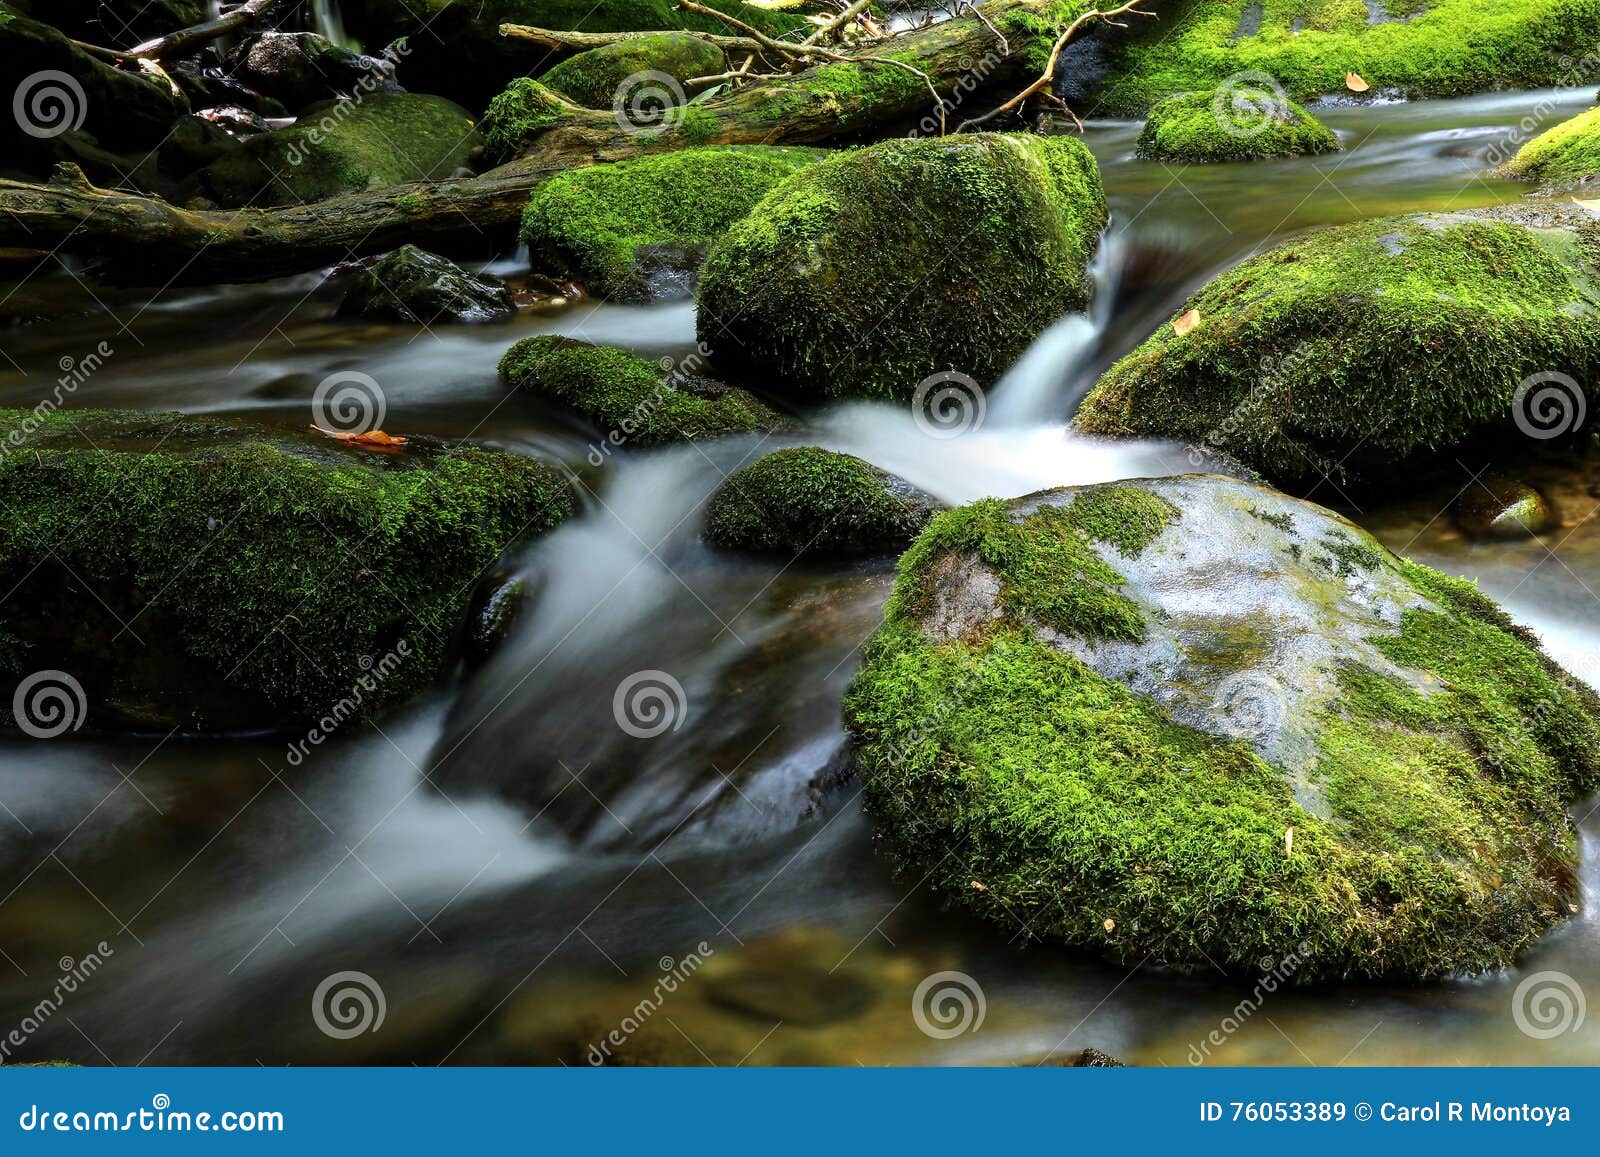 Mossy Boulders Of The Great Smoky Mountains National Park Stock Image